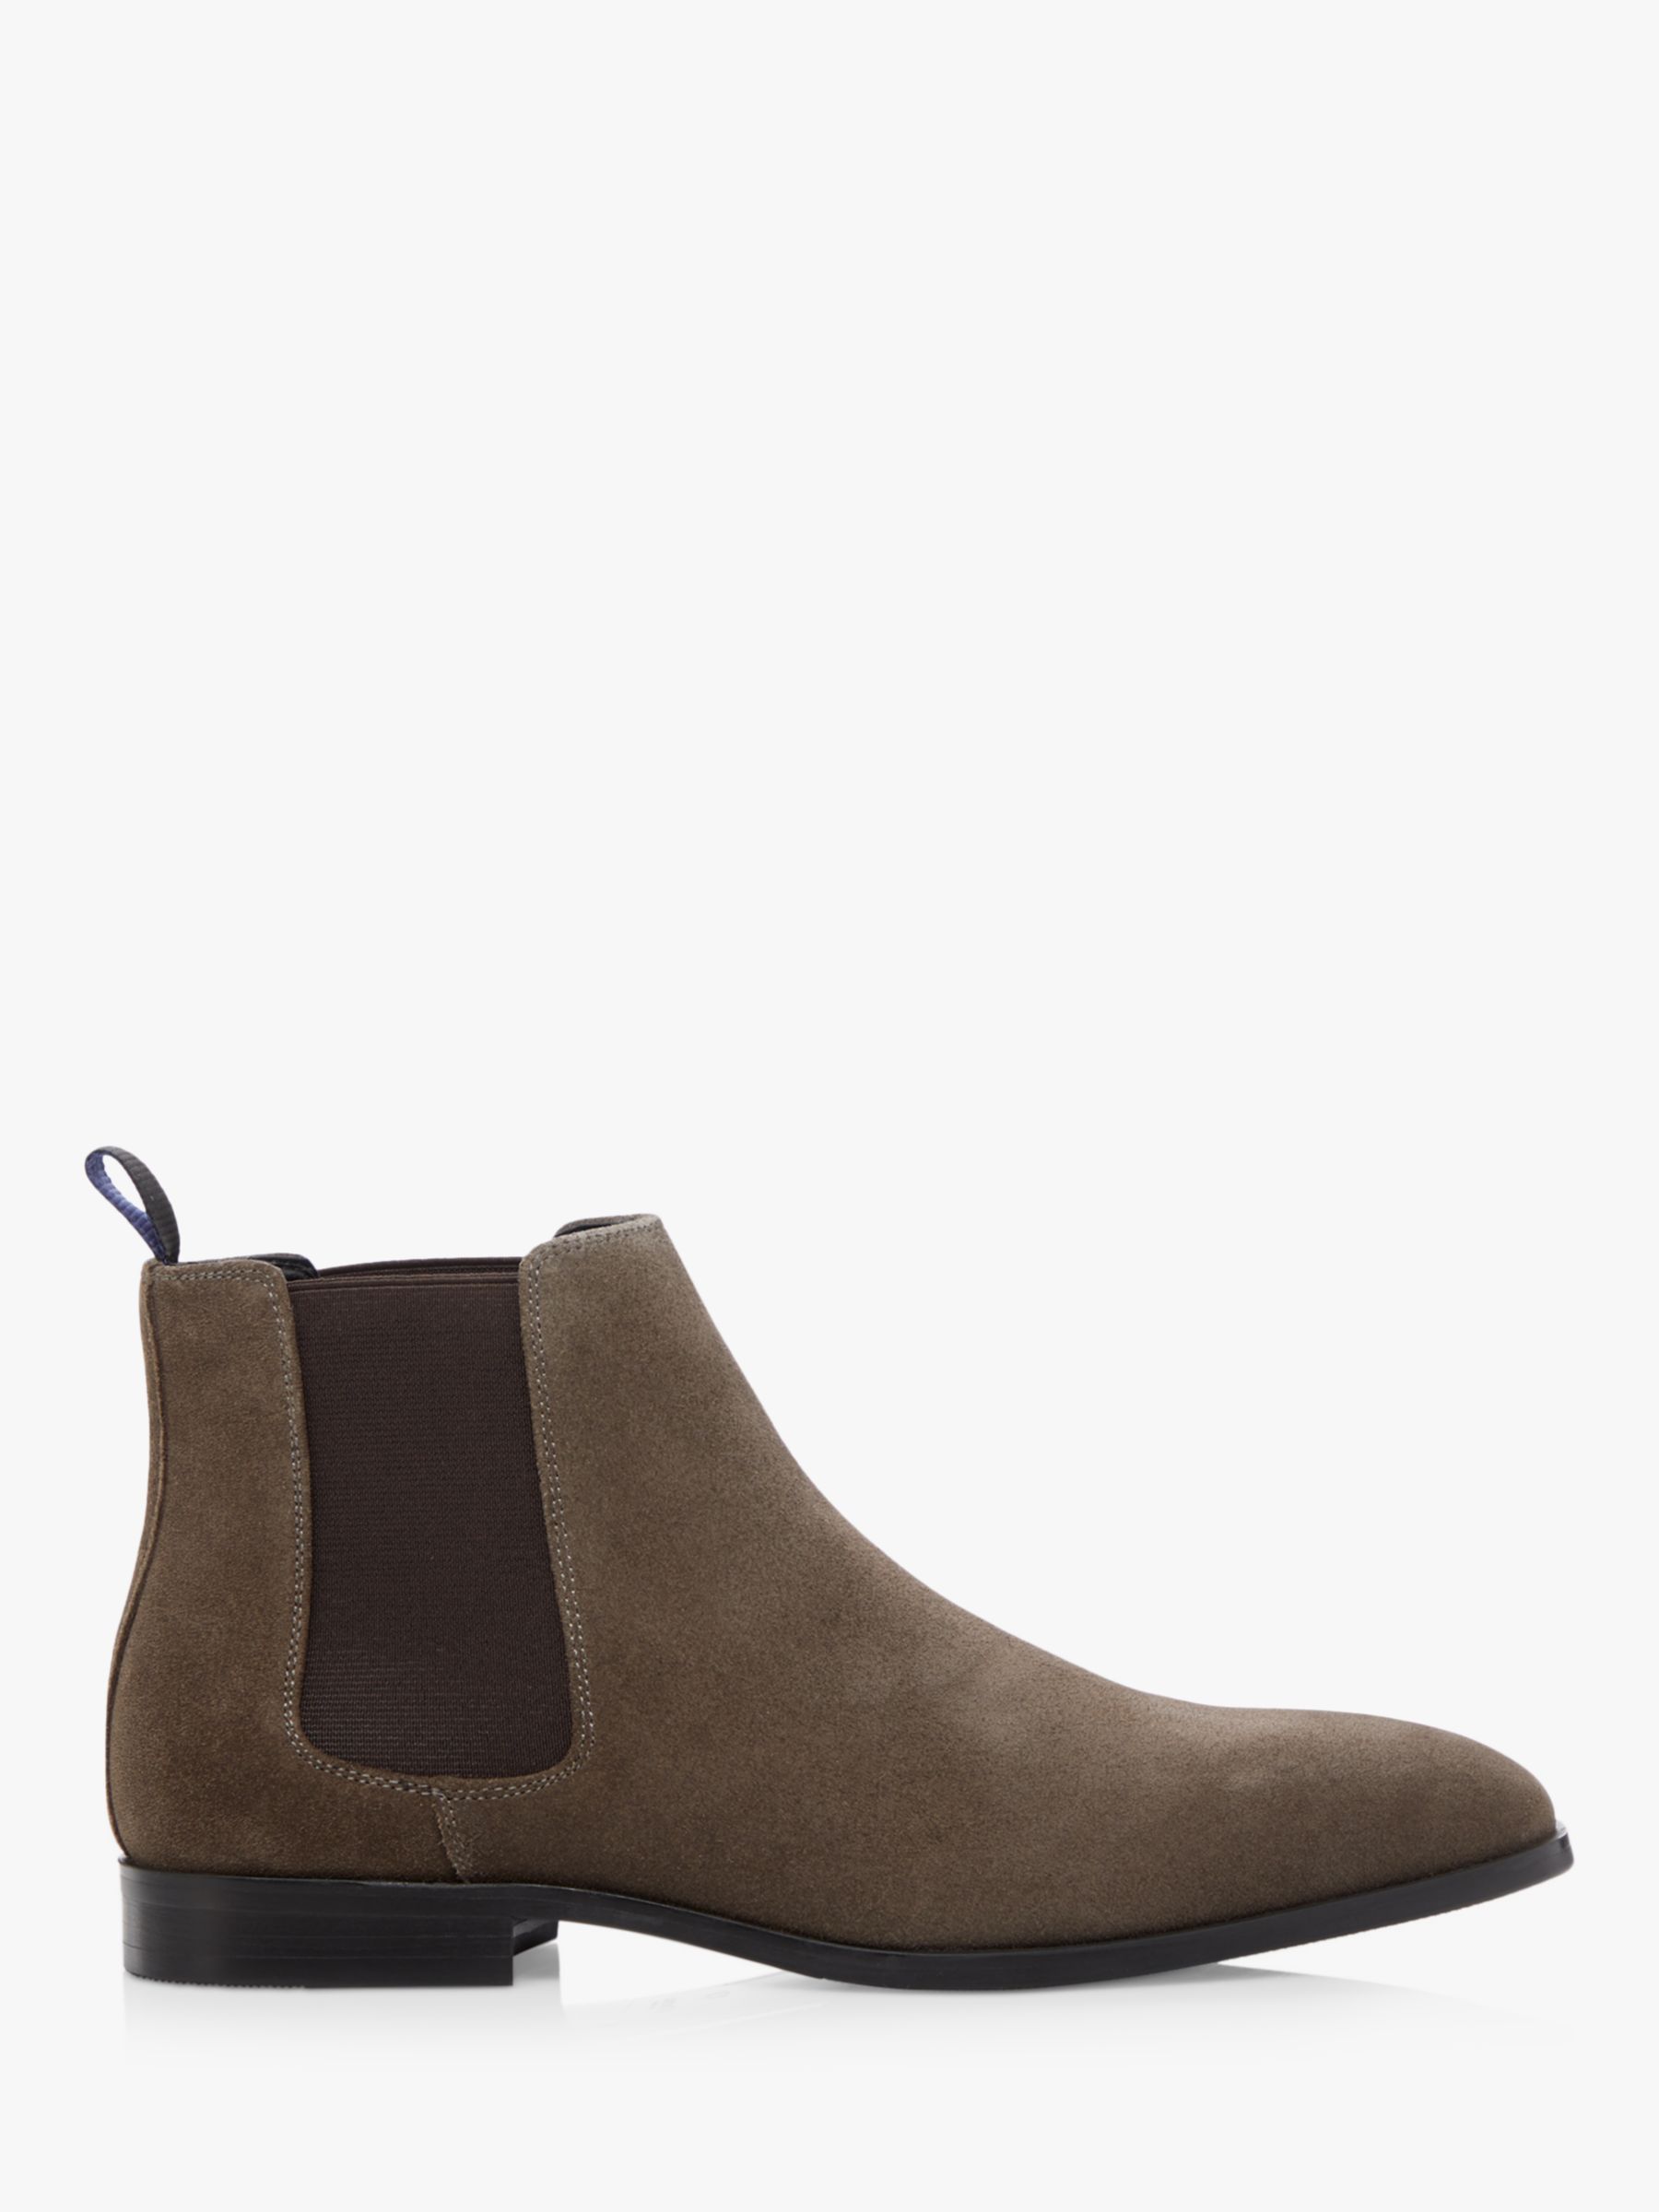 Dune Mantle Suede Chelsea Boots, Grey, Grey at John Lewis & Partners